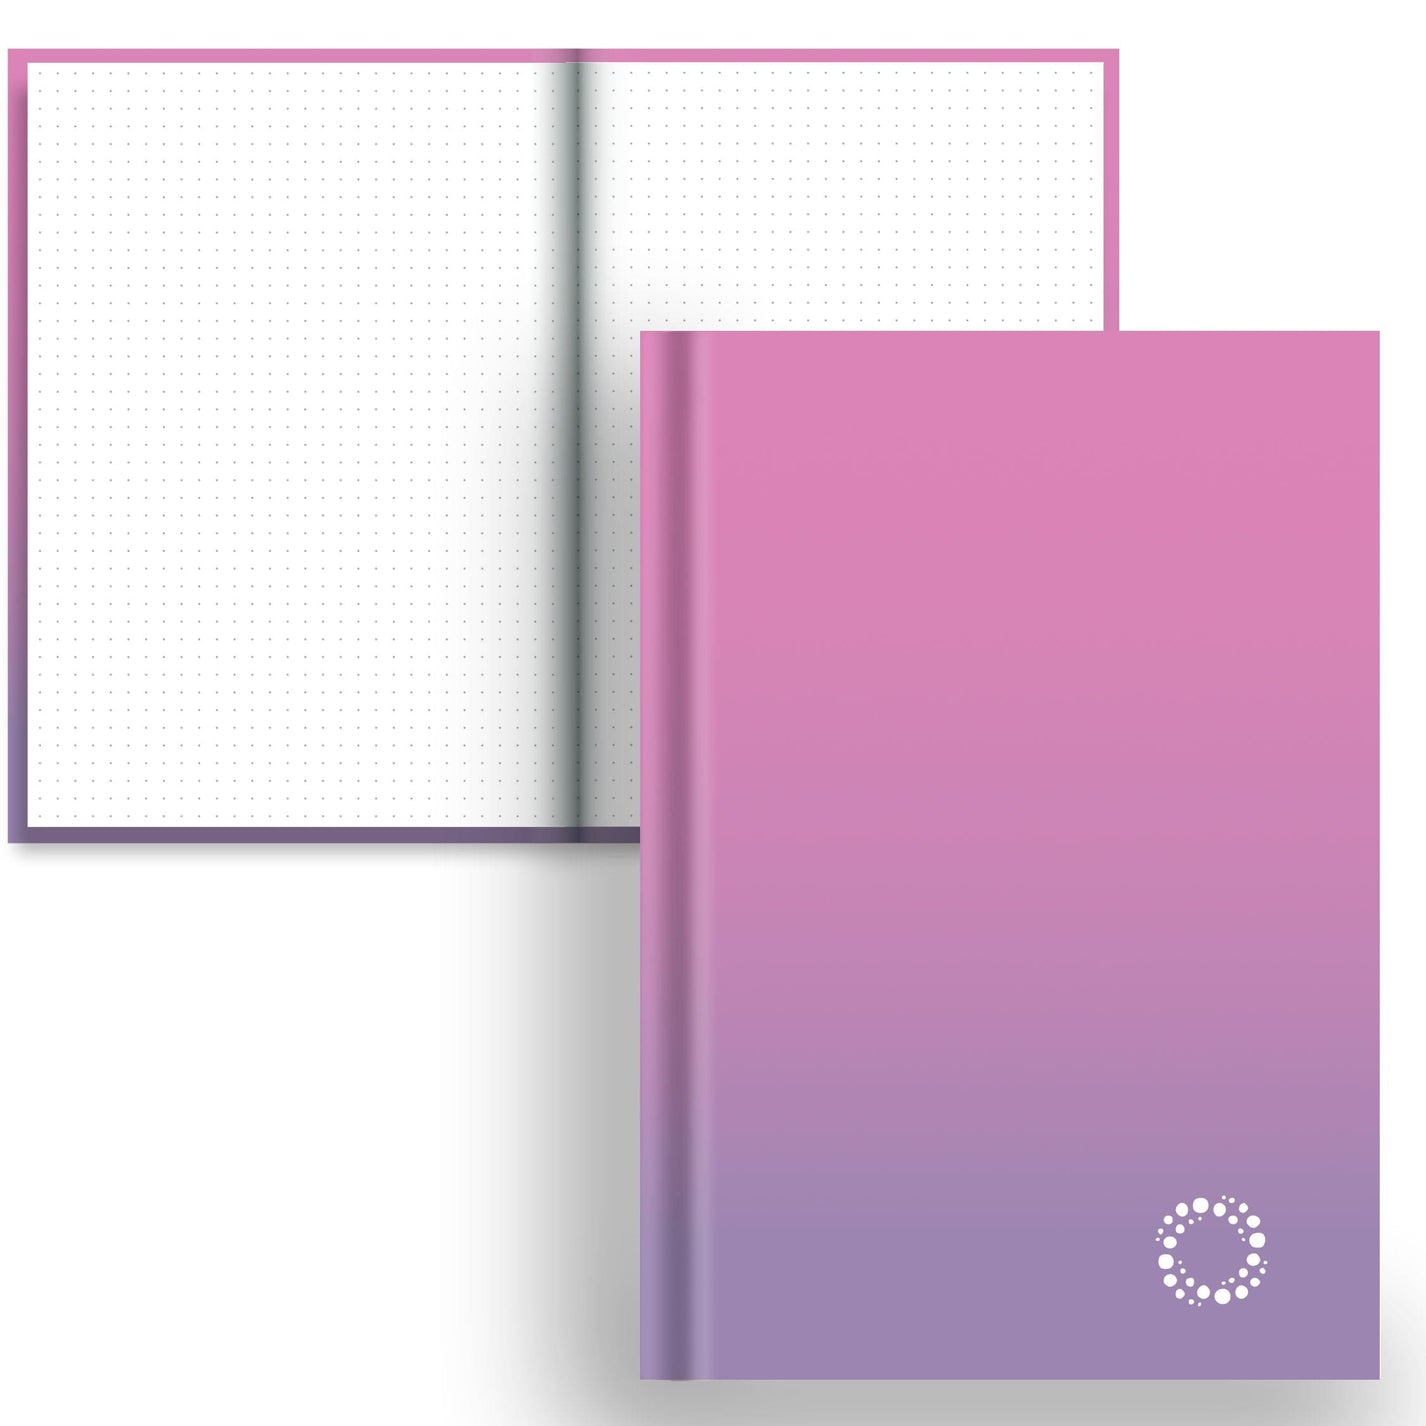 DayDot Journals Colour Fade Dot Grid Blossom and Periwinkle - A5 Hardcover Notebook